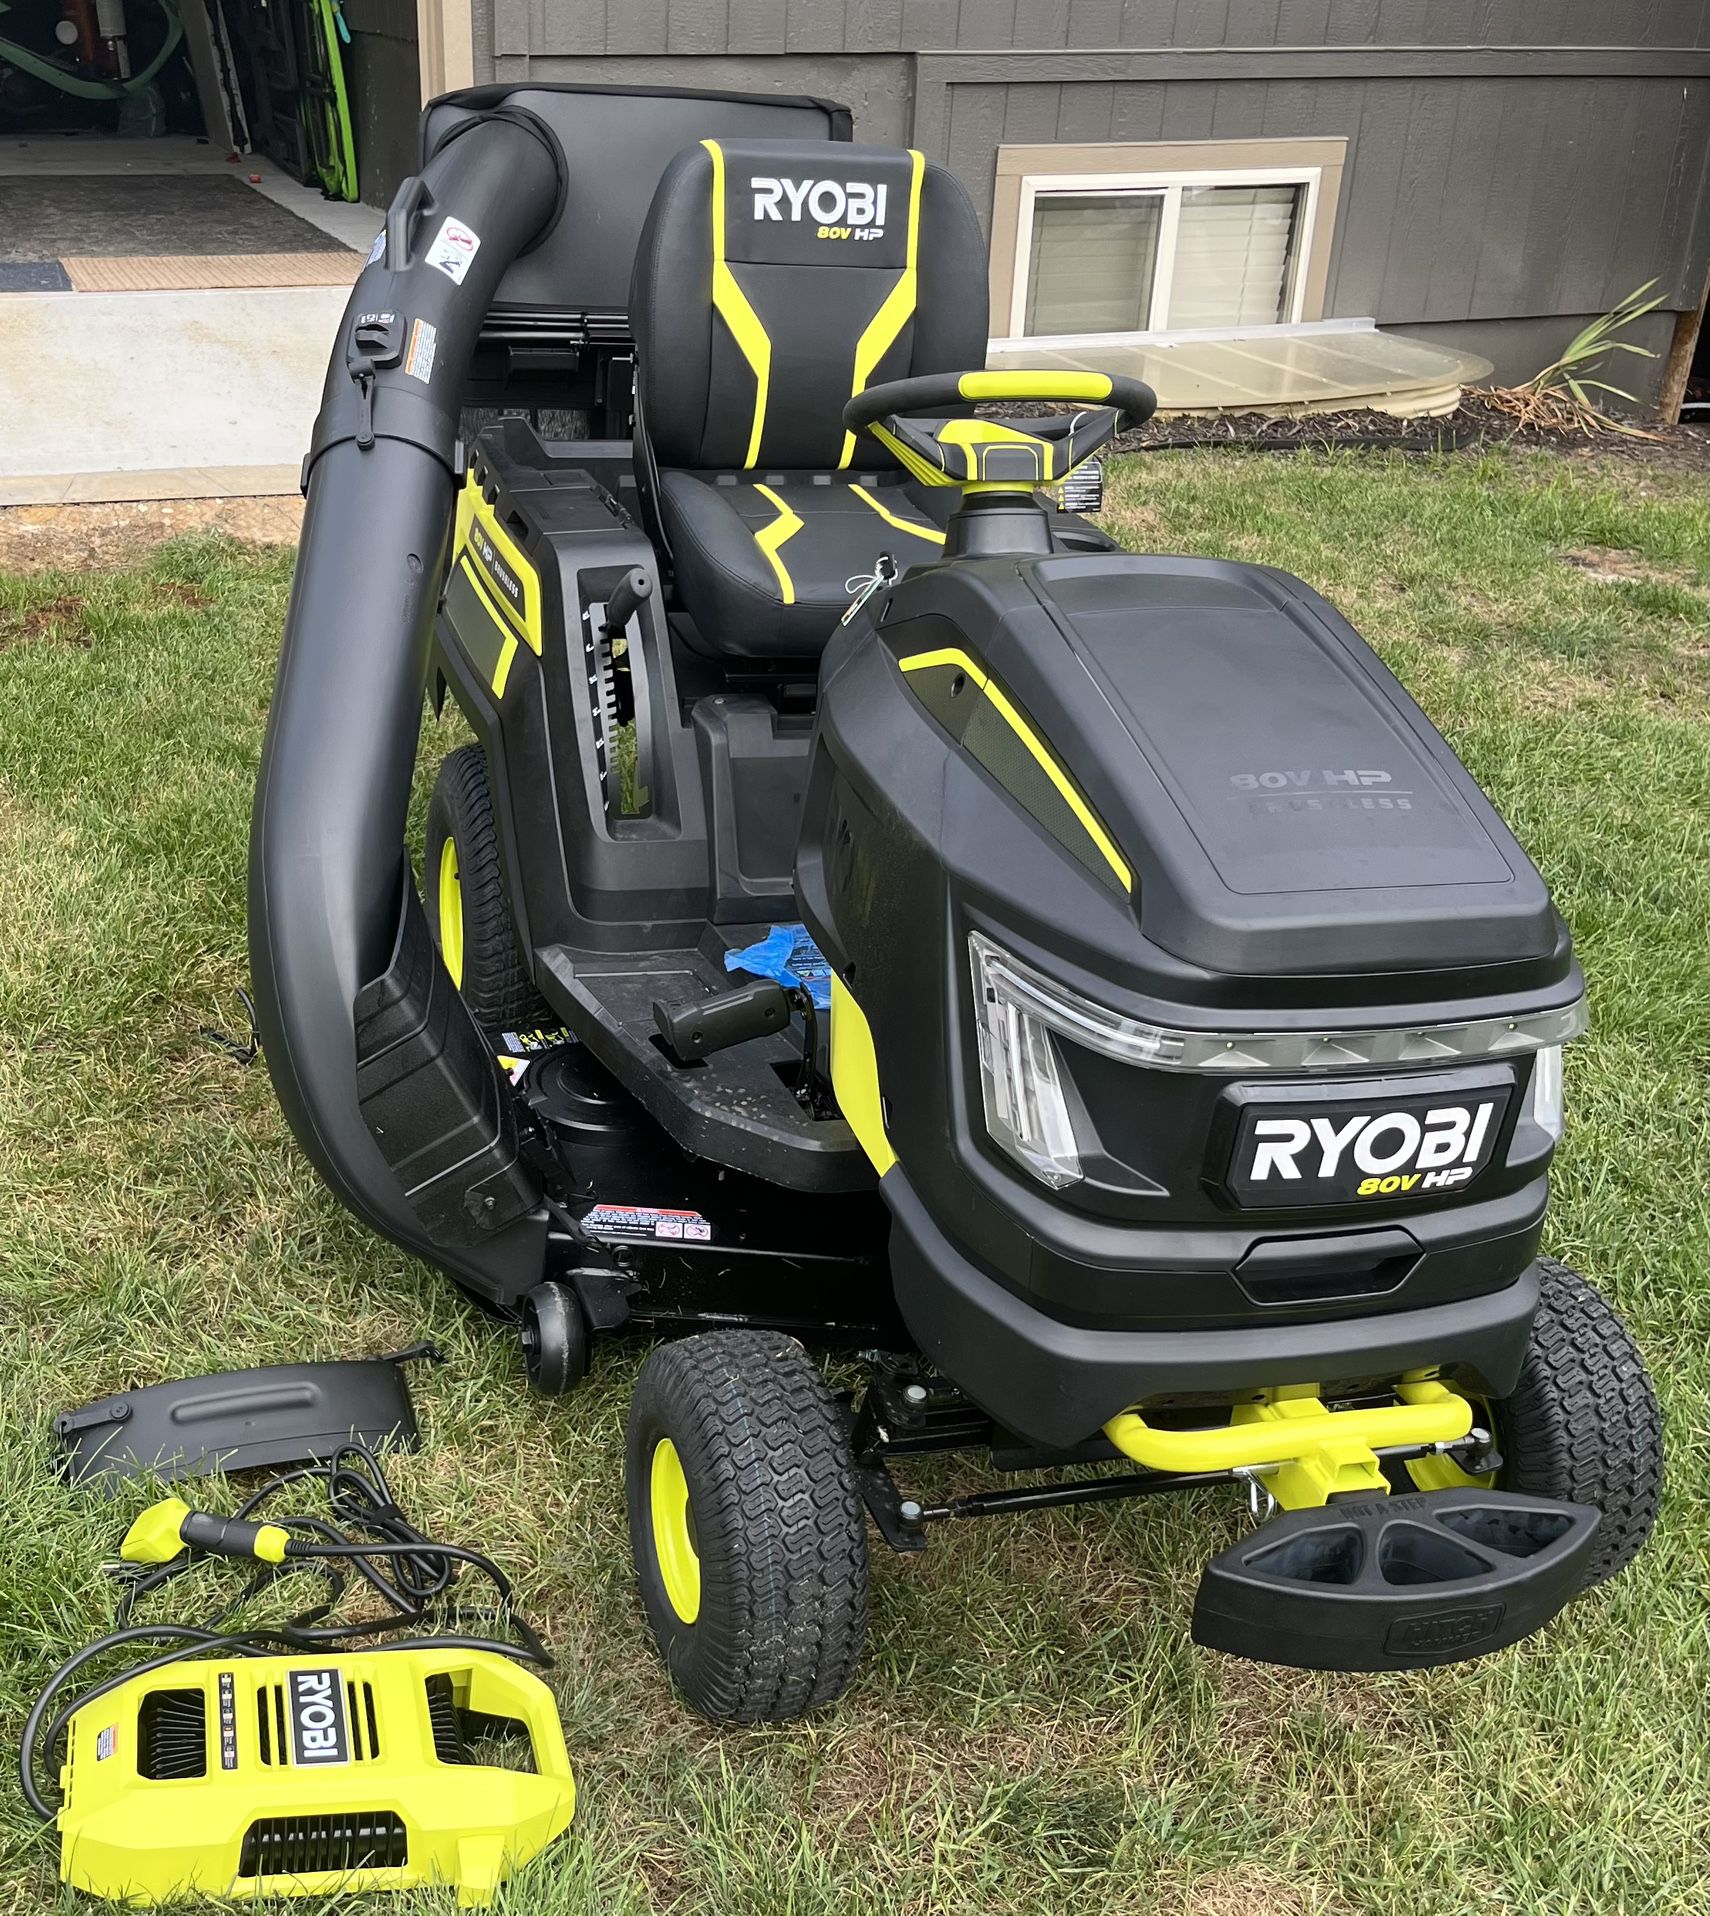 RYOBI 80v Electric Riding Mower - Great Deal with Accessories 